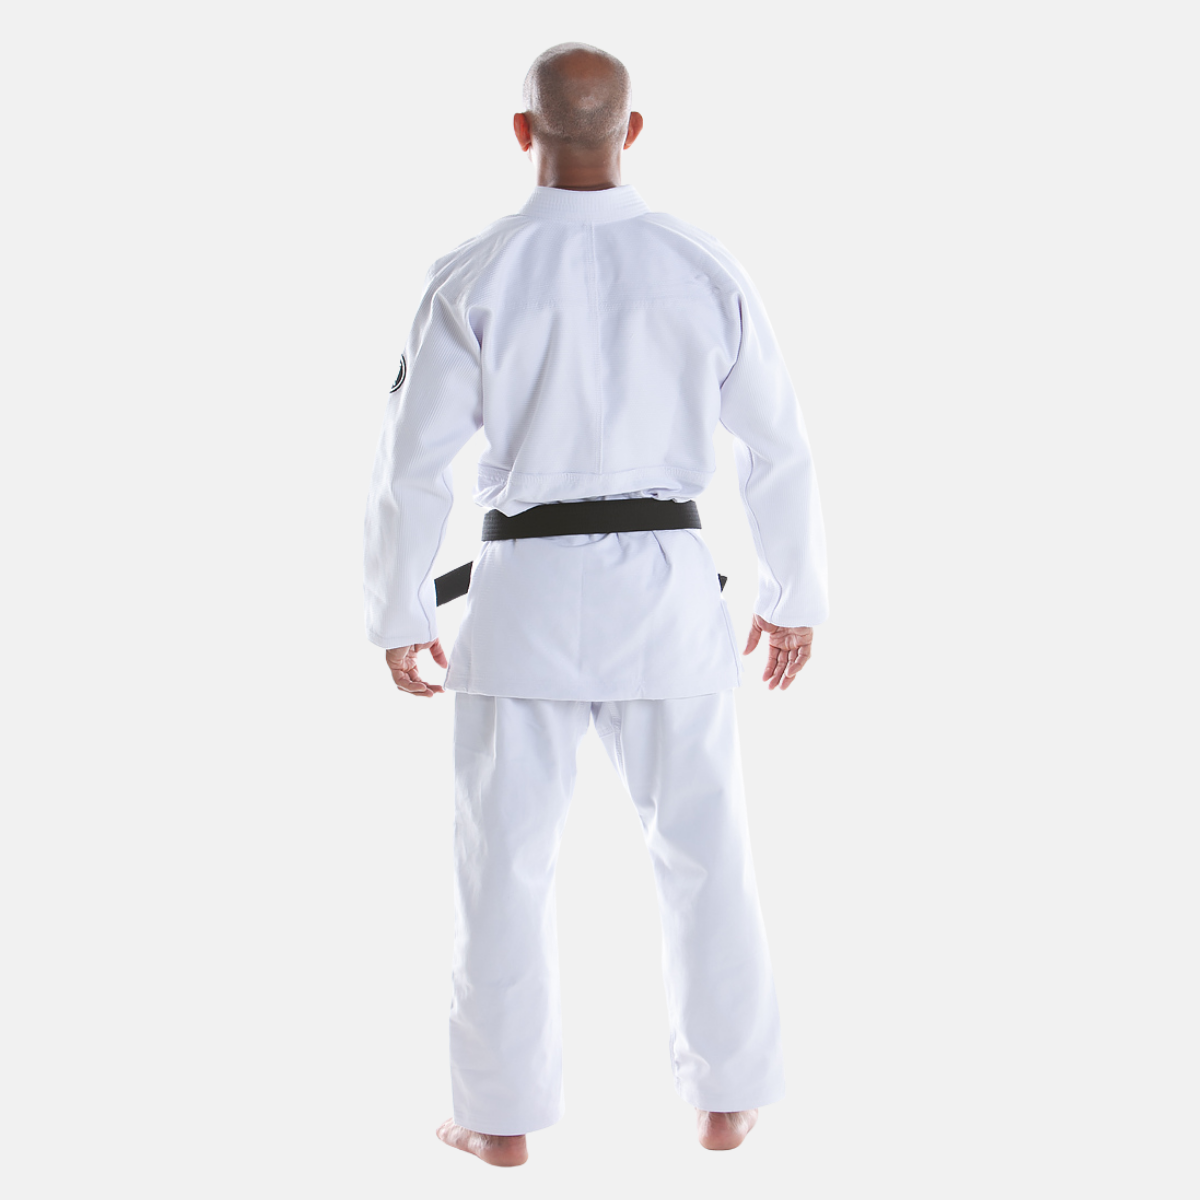 Judogi NKL COMPETITION Blanco 650g/m Personalizable